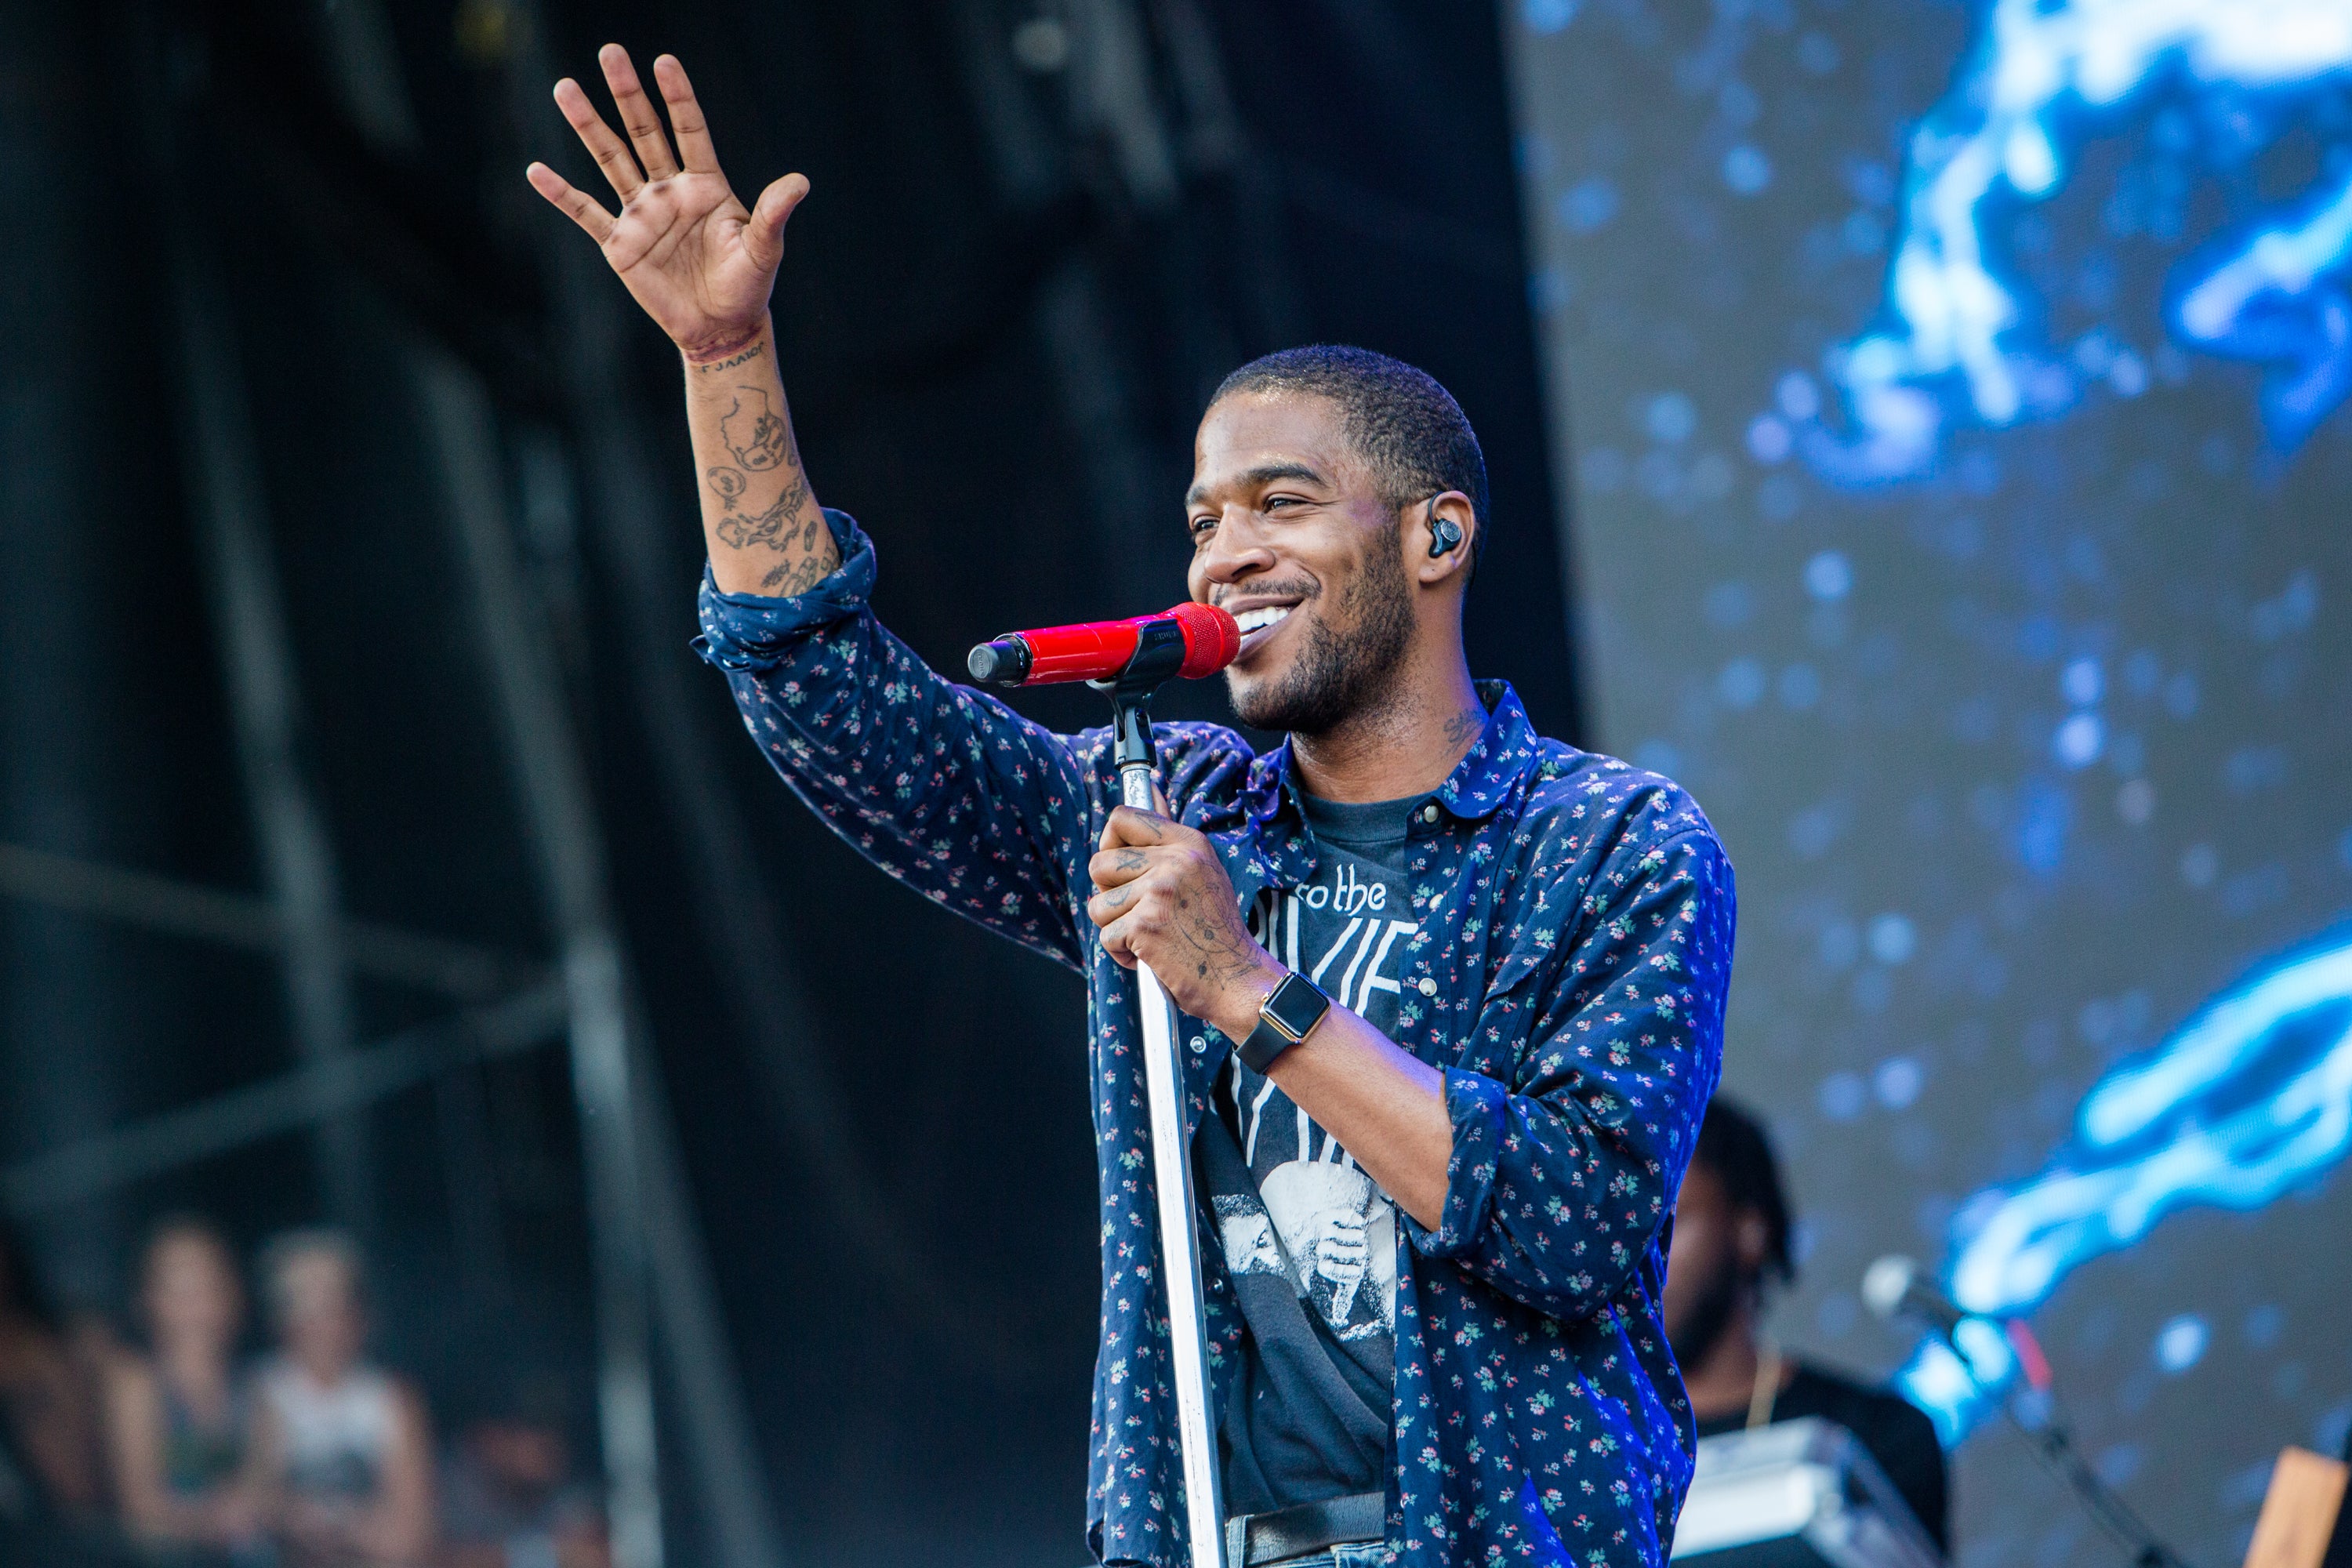 Kid Cudi Thanks Friends And Fans For Support: 'I Have Nothing But Love For You'
